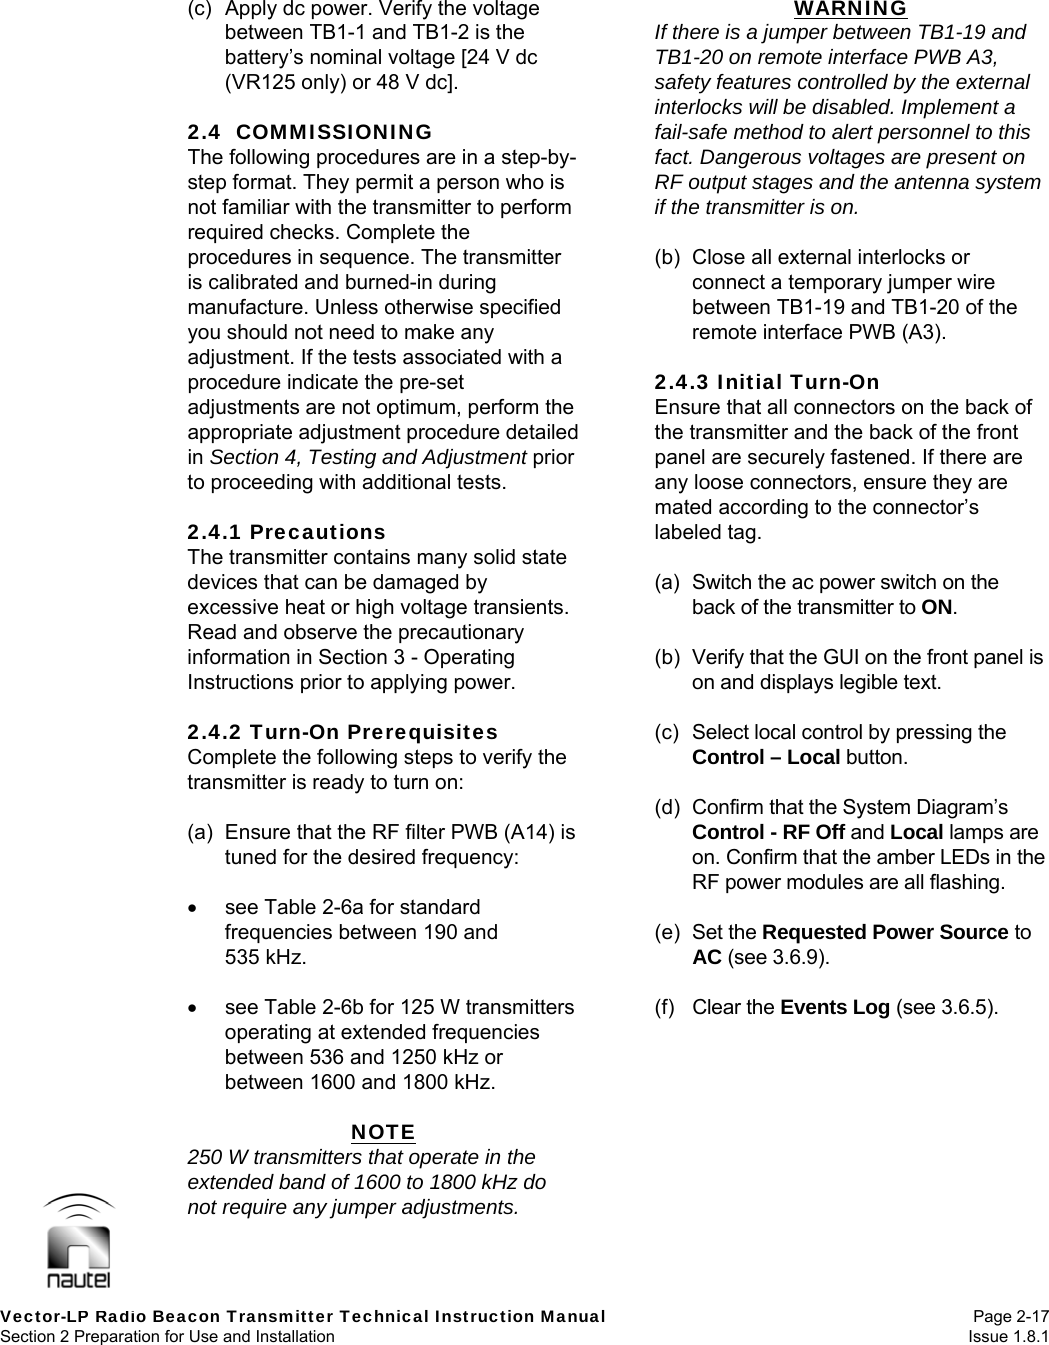   Vector-LP Radio Beacon Transmitter Technical Instruction Manual Page 2-17 Section 2 Preparation for Use and Installation  Issue 1.8.1 (c)  Apply dc power. Verify the voltage between TB1-1 and TB1-2 is the battery’s nominal voltage [24 V dc (VR125 only) or 48 V dc].  2.4  COMMISSIONING The following procedures are in a step-by-step format. They permit a person who is not familiar with the transmitter to perform required checks. Complete the procedures in sequence. The transmitter is calibrated and burned-in during manufacture. Unless otherwise specified you should not need to make any adjustment. If the tests associated with a procedure indicate the pre-set adjustments are not optimum, perform the appropriate adjustment procedure detailed in Section 4, Testing and Adjustment prior to proceeding with additional tests.  2.4.1 Precautions The transmitter contains many solid state devices that can be damaged by excessive heat or high voltage transients. Read and observe the precautionary information in Section 3 - Operating Instructions prior to applying power.  2.4.2 Turn-On Prerequisites Complete the following steps to verify the transmitter is ready to turn on:  (a)  Ensure that the RF filter PWB (A14) is tuned for the desired frequency:    see Table 2-6a for standard frequencies between 190 and 535 kHz.    see Table 2-6b for 125 W transmitters operating at extended frequencies between 536 and 1250 kHz or between 1600 and 1800 kHz.  NOTE 250 W transmitters that operate in the extended band of 1600 to 1800 kHz do not require any jumper adjustments. WARNING If there is a jumper between TB1-19 and TB1-20 on remote interface PWB A3, safety features controlled by the external interlocks will be disabled. Implement a fail-safe method to alert personnel to this fact. Dangerous voltages are present on RF output stages and the antenna system if the transmitter is on.  (b)  Close all external interlocks or connect a temporary jumper wire between TB1-19 and TB1-20 of the remote interface PWB (A3).  2.4.3 Initial Turn-On Ensure that all connectors on the back of the transmitter and the back of the front panel are securely fastened. If there are any loose connectors, ensure they are mated according to the connector’s labeled tag.  (a)  Switch the ac power switch on the back of the transmitter to ON.  (b)  Verify that the GUI on the front panel is on and displays legible text.  (c)  Select local control by pressing the Control – Local button.  (d)  Confirm that the System Diagram’s Control - RF Off and Local lamps are on. Confirm that the amber LEDs in the RF power modules are all flashing.  (e) Set the Requested Power Source to AC (see 3.6.9).  (f) Clear the Events Log (see 3.6.5).  